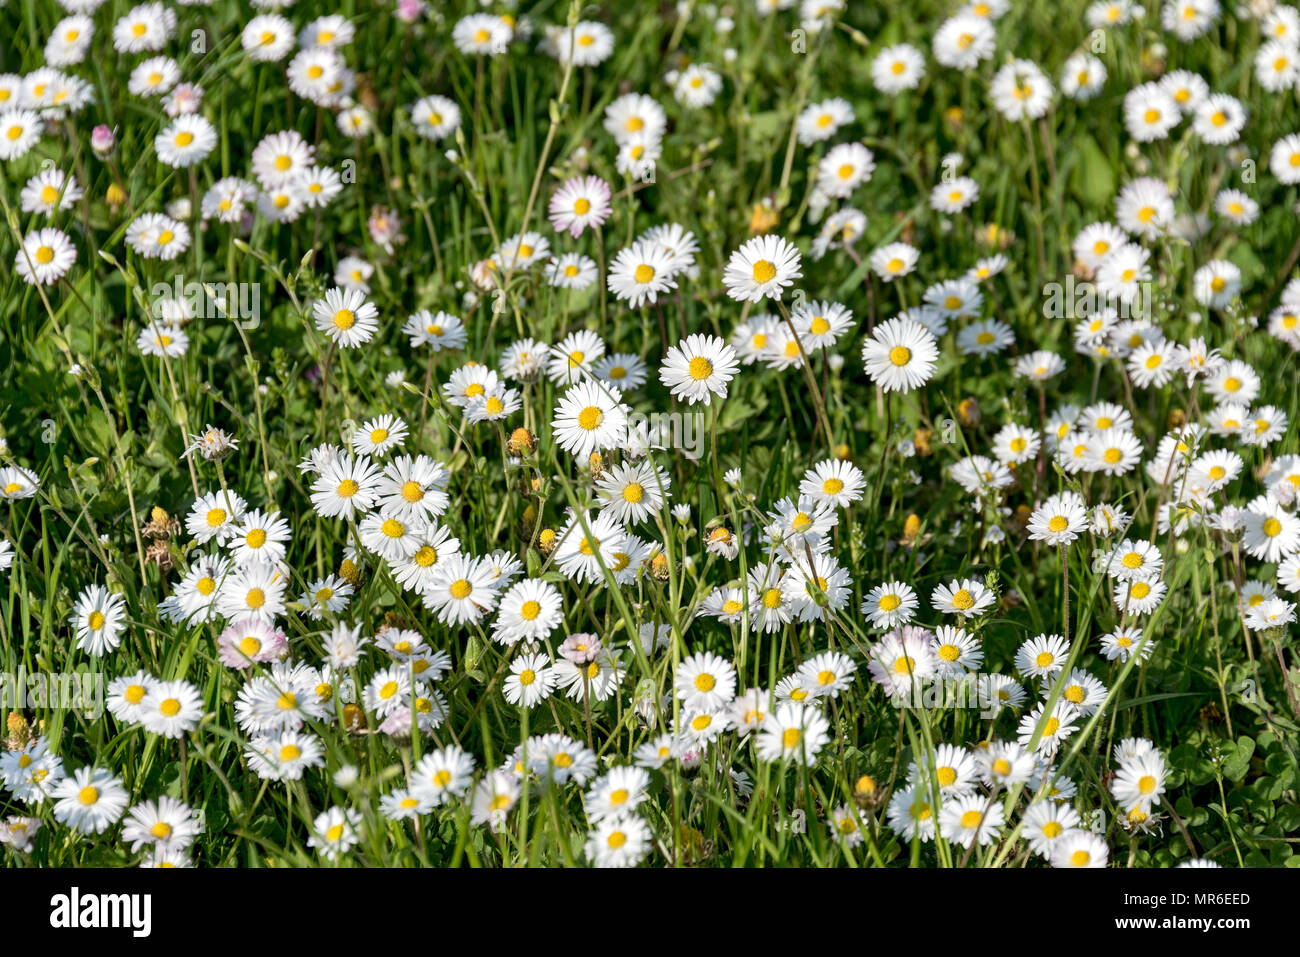 Common daisies (Bellis perennis) in a meadow, Upper Bavaria, Bavaria, Germany Stock Photo